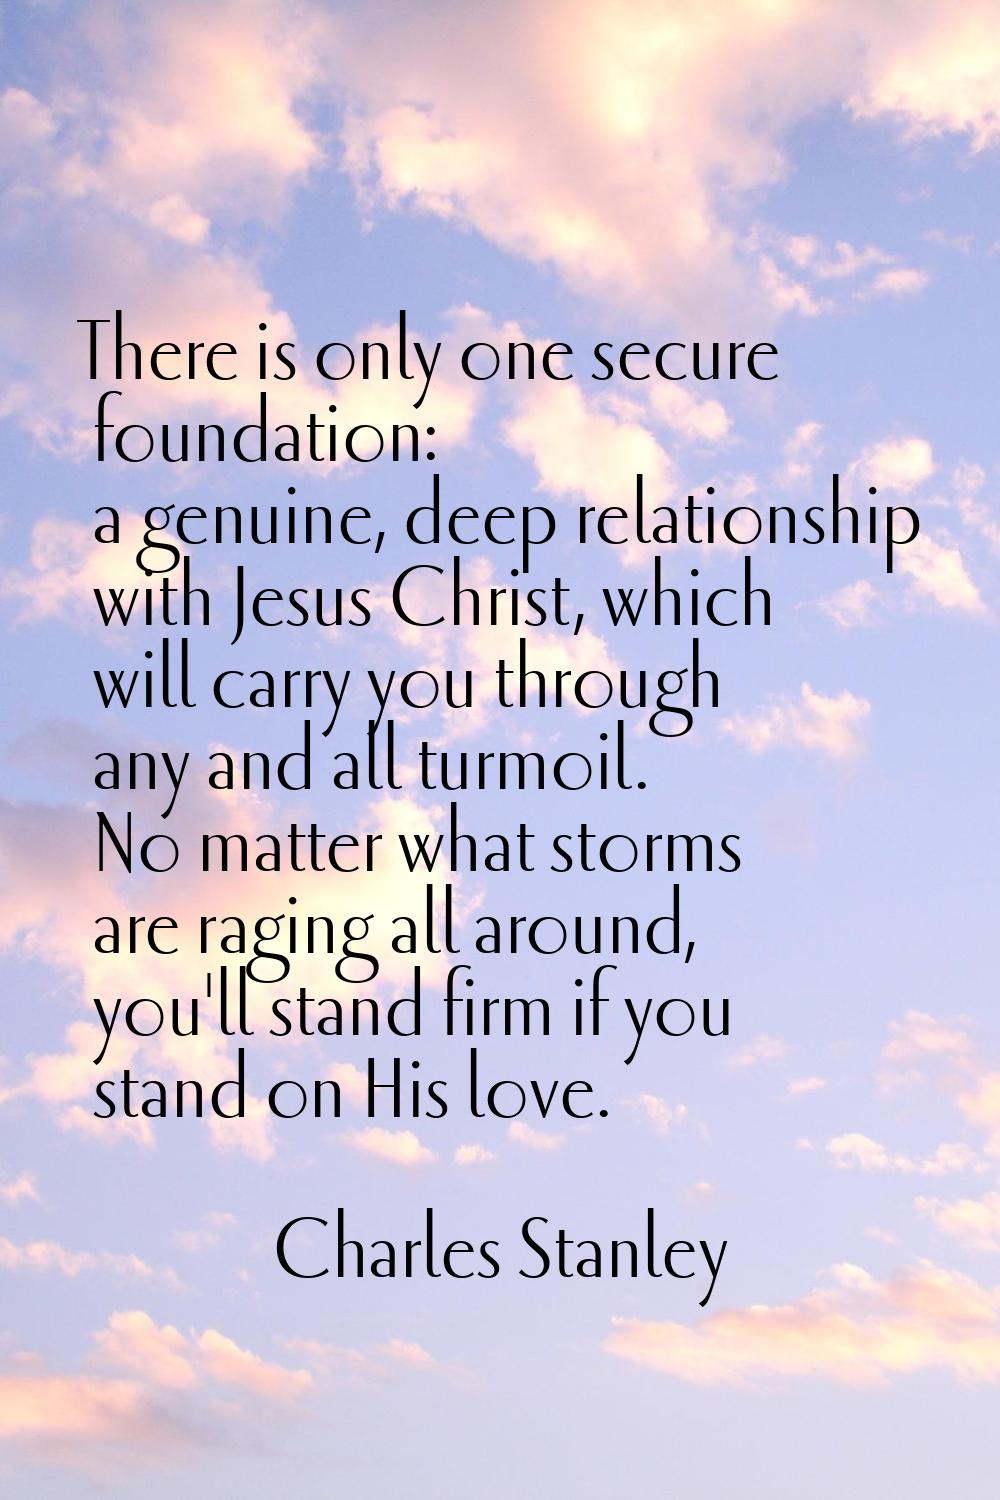 There is only one secure foundation: a genuine, deep relationship with Jesus Christ, which will car